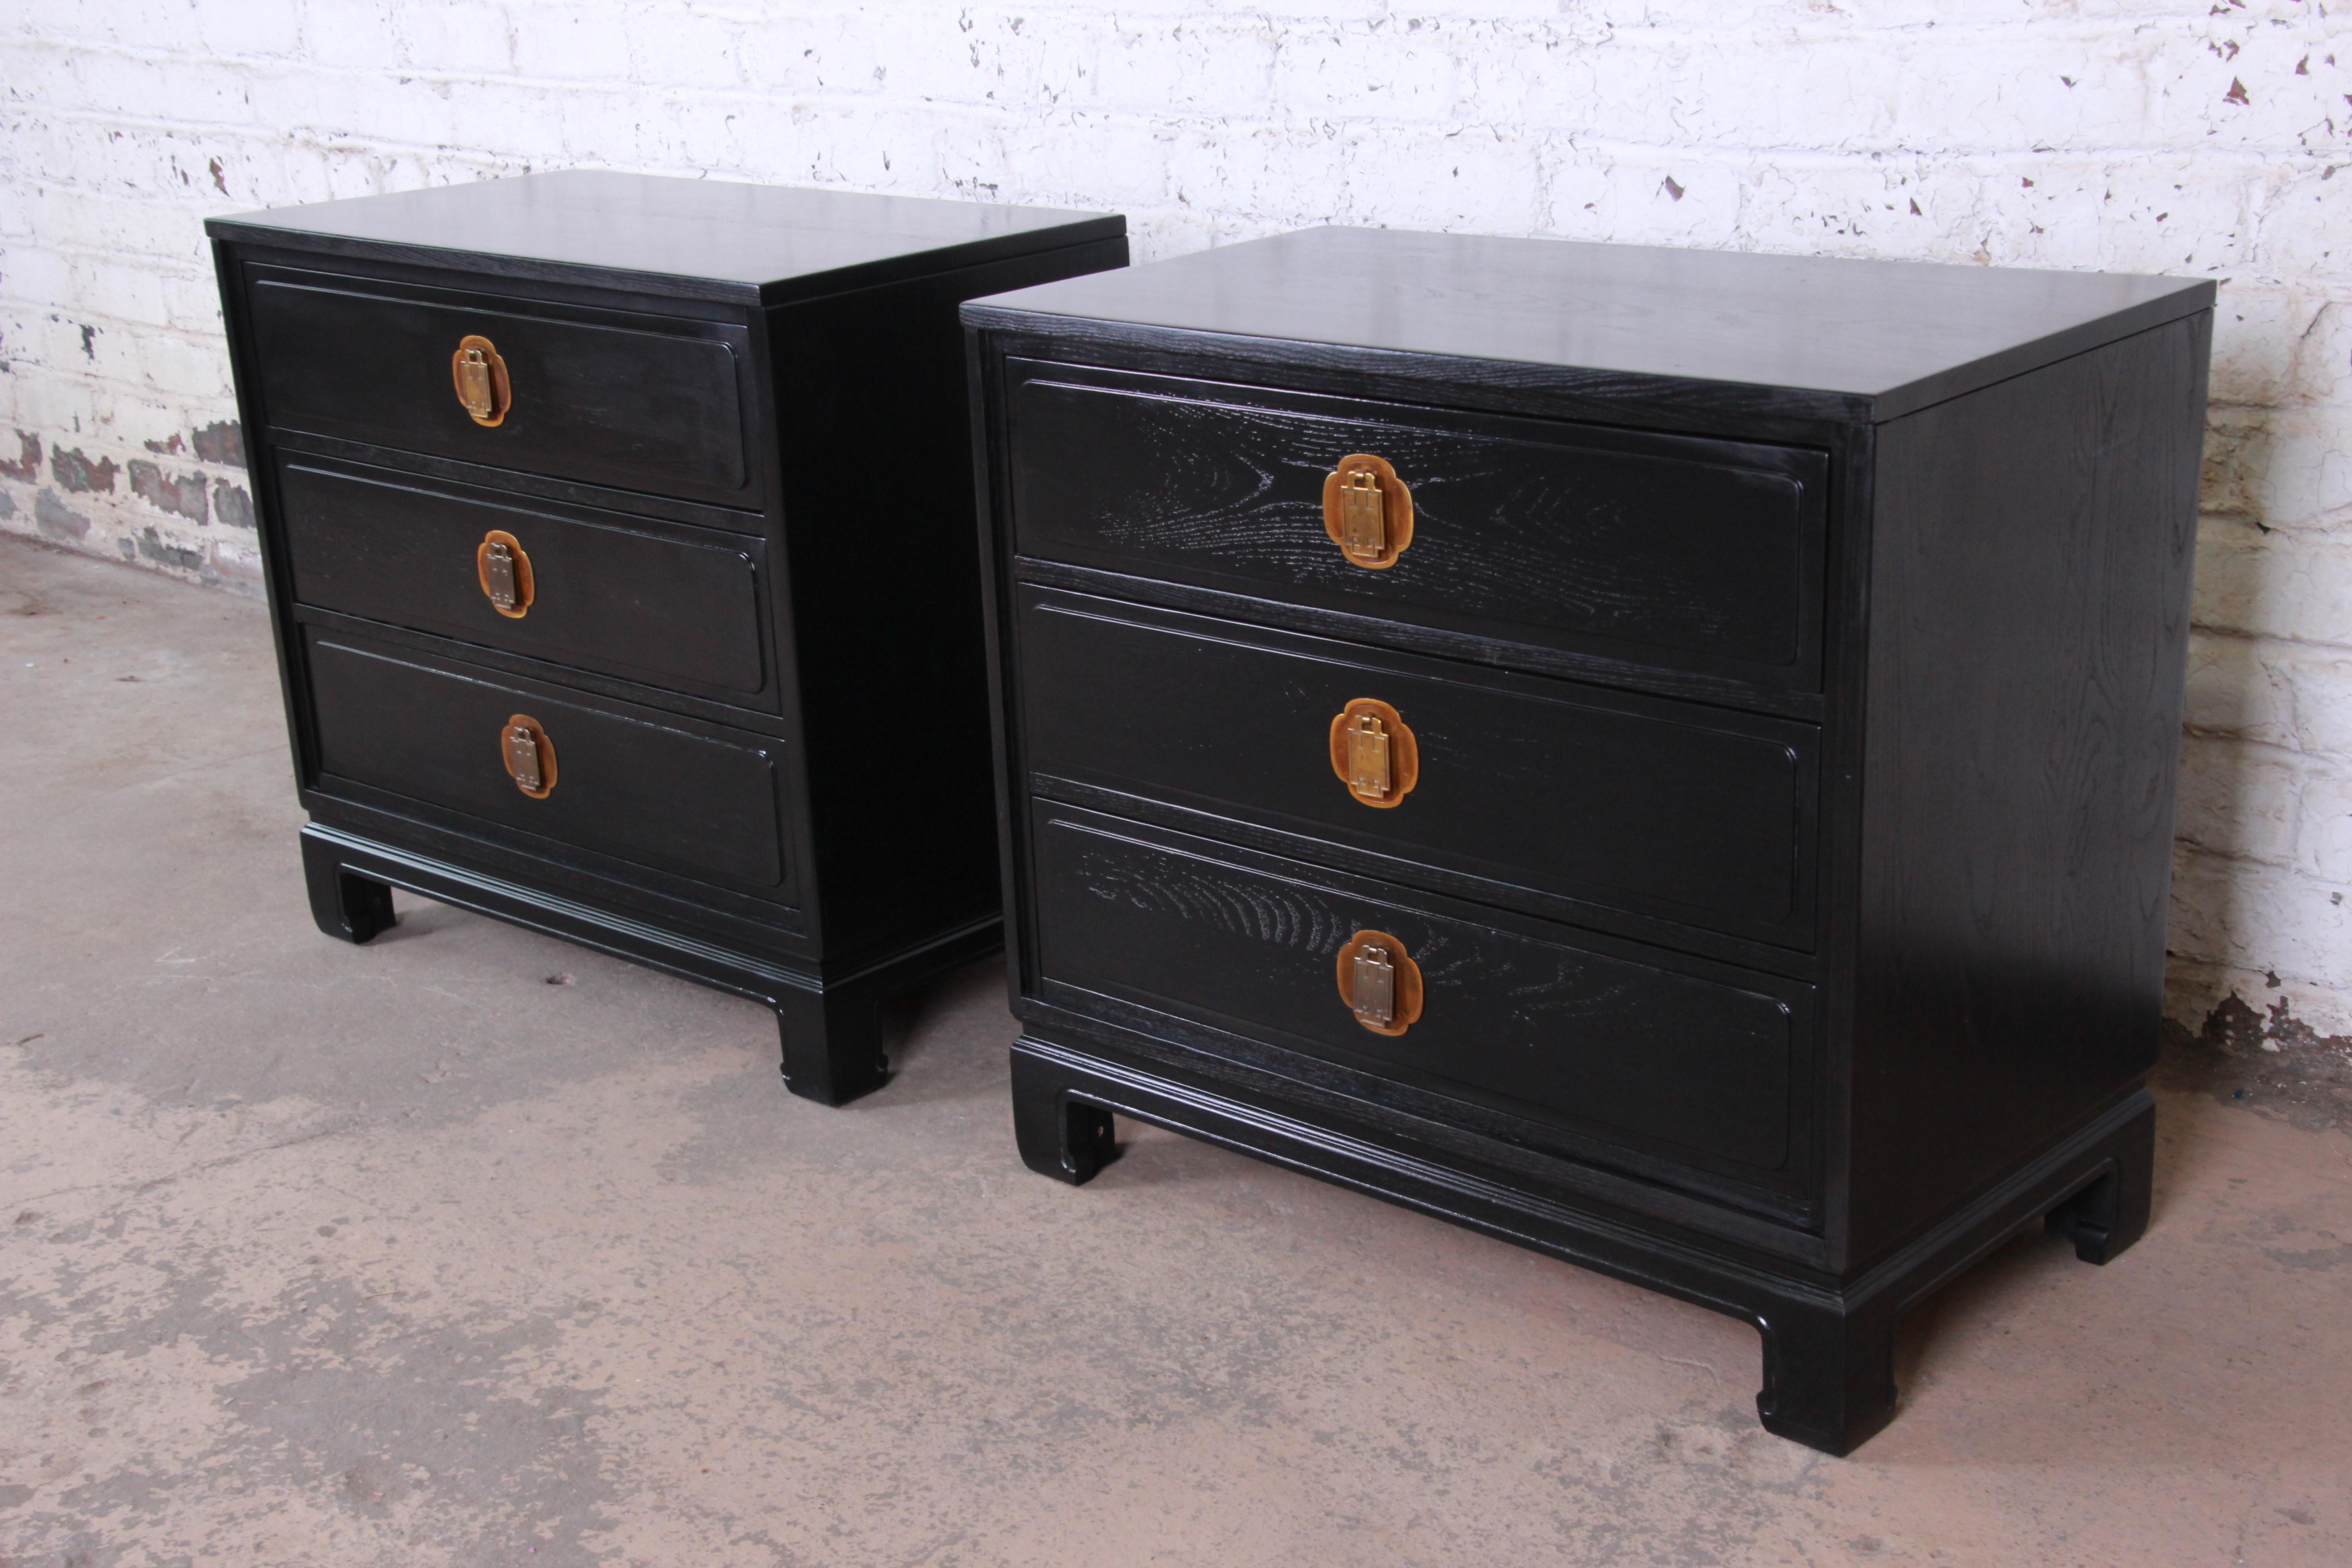 A gorgeous pair of newly ebonized Hollywood Regency chinoiserie large bedside tables or bachelor chests by Davis Cabinet Co. The chests feature a stunning ebonized finish over walnut and sleek Mid-Century Modern design with an Asian flair. They